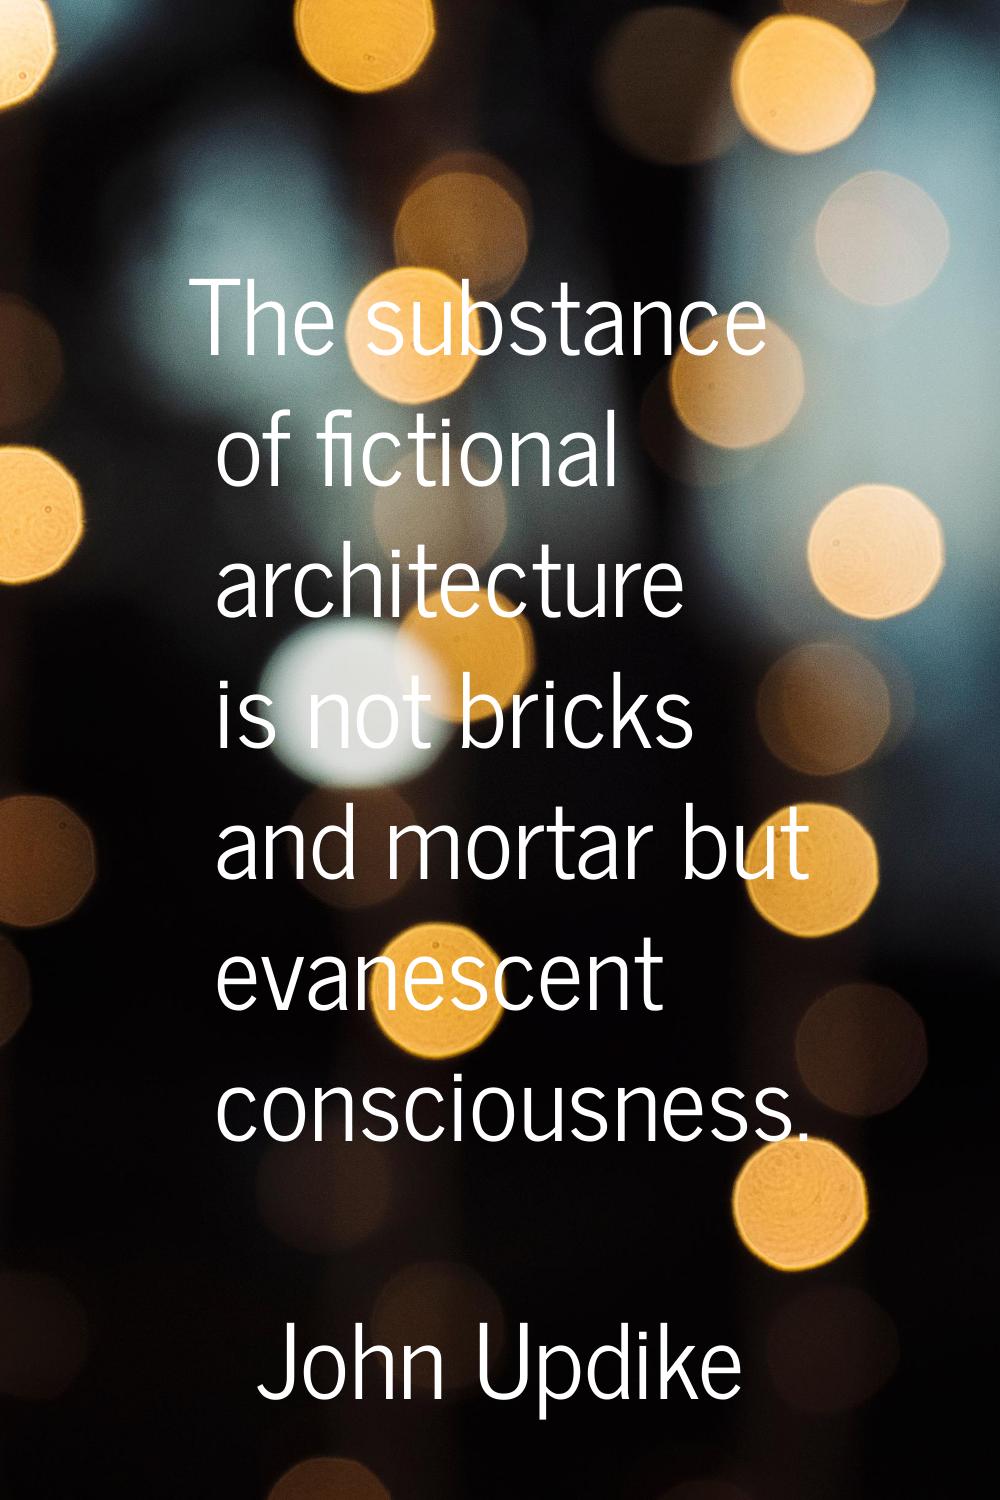 The substance of fictional architecture is not bricks and mortar but evanescent consciousness.